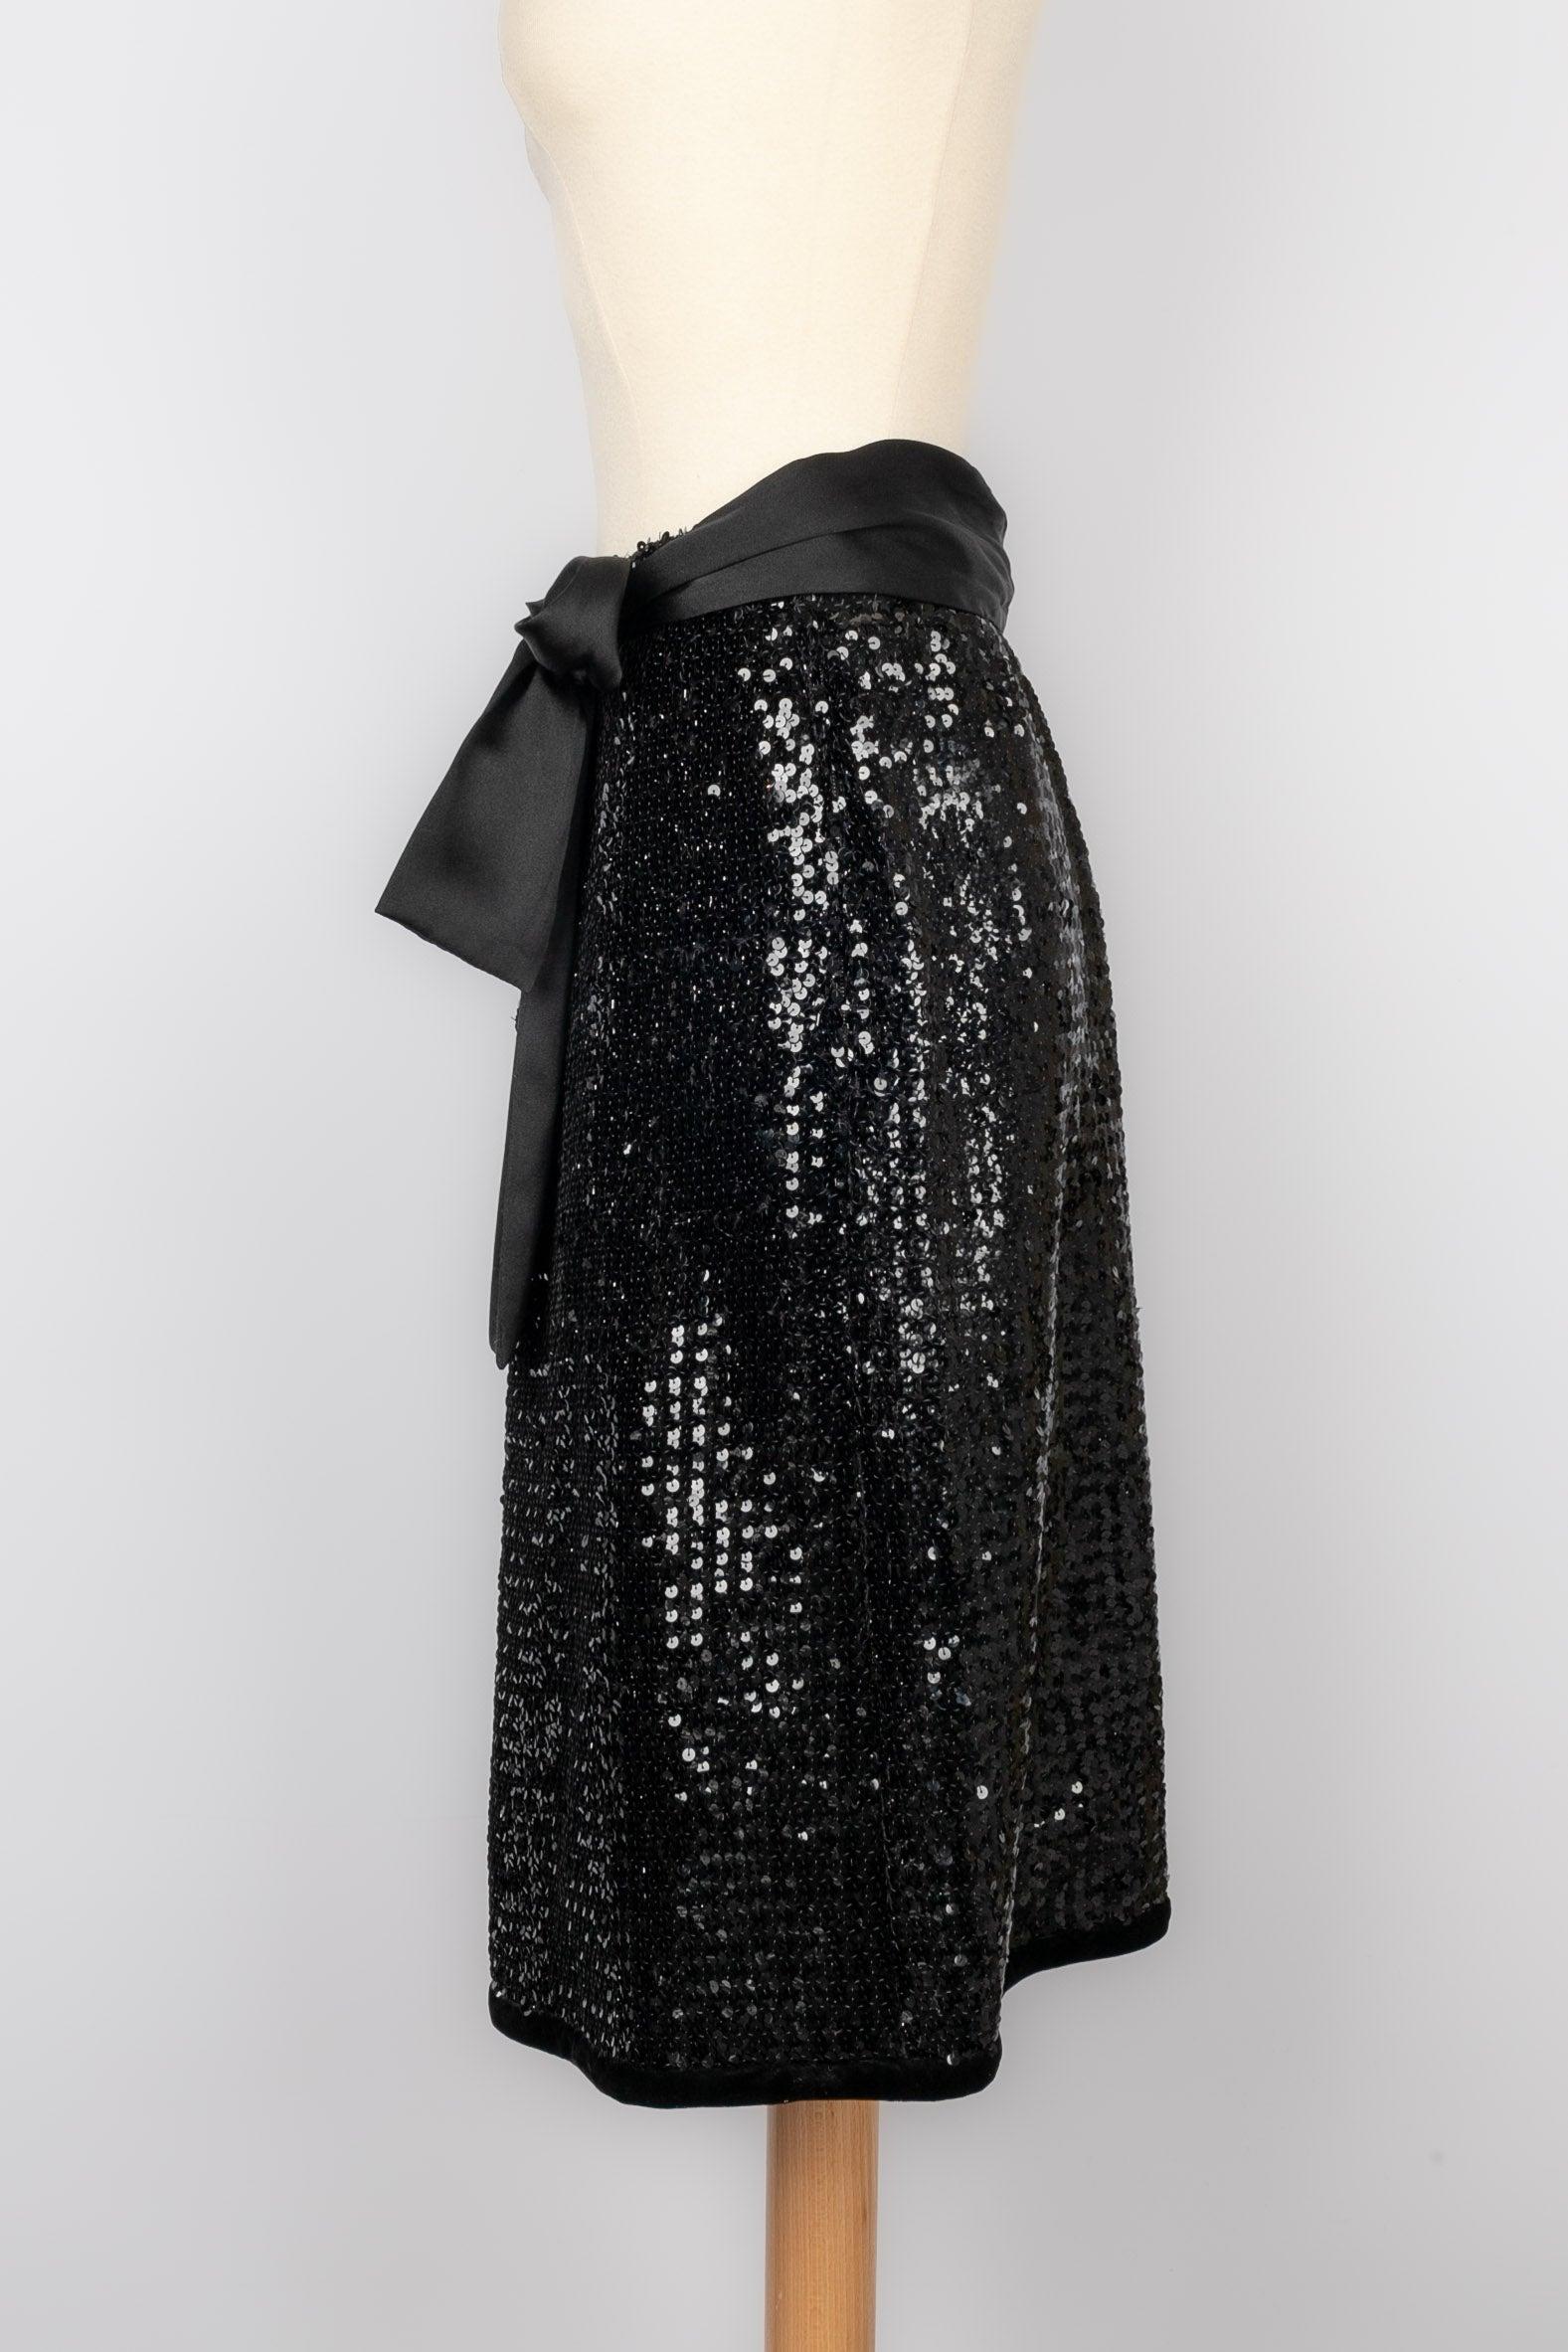 Yves Saint Laurent - (Made in France) Black sequin sort skirt. 40FR shirt. Composition label cut.

Additional information:
Condition: Very good condition
Dimensions: Waist: 32 cm - Length: 60 cm

Seller Reference: FJ81
